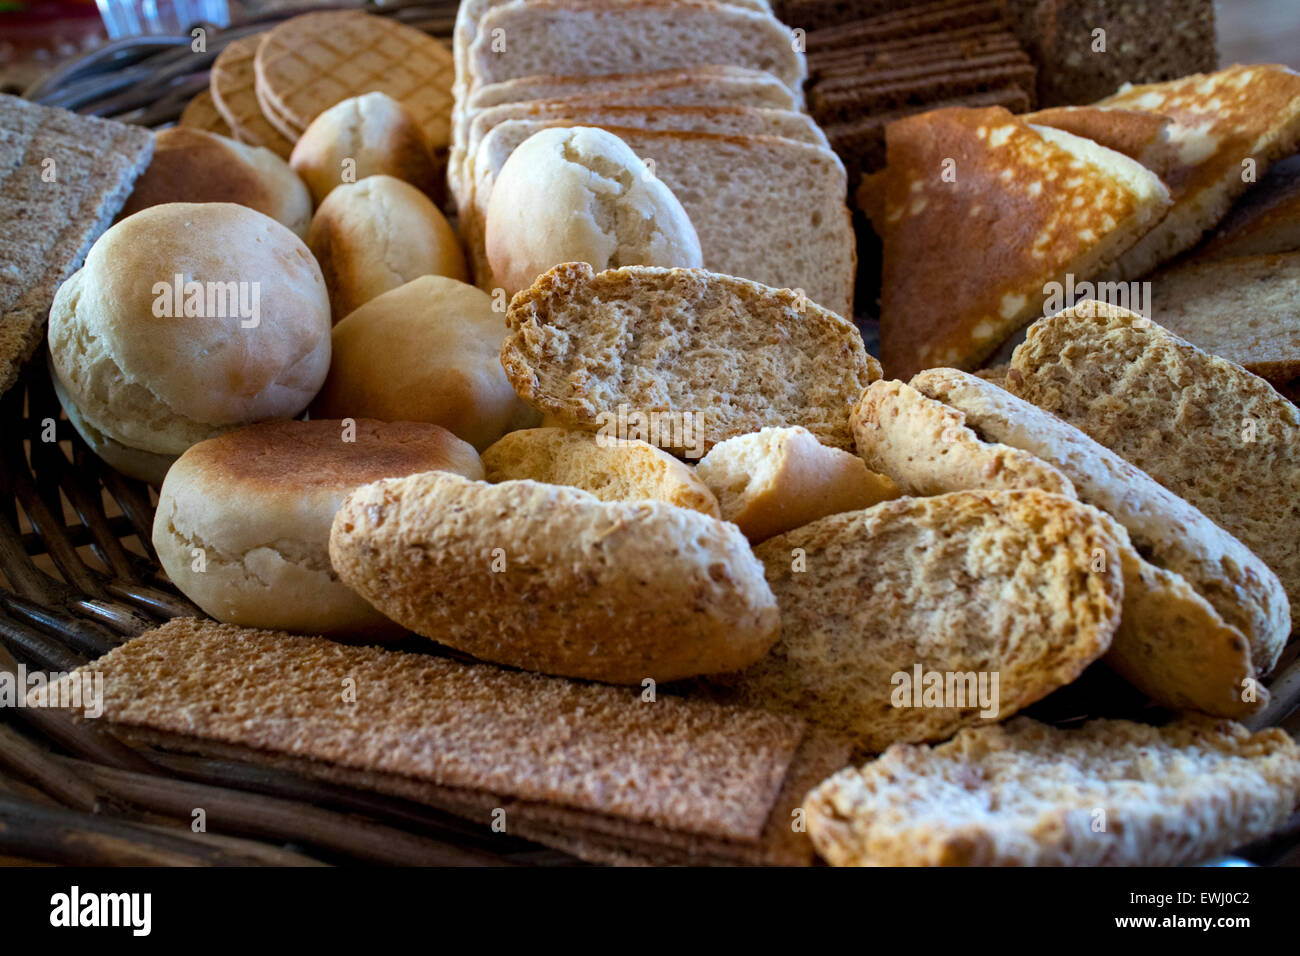 selection of nordic and icelandic breads laid out on a table in Iceland Stock Photo